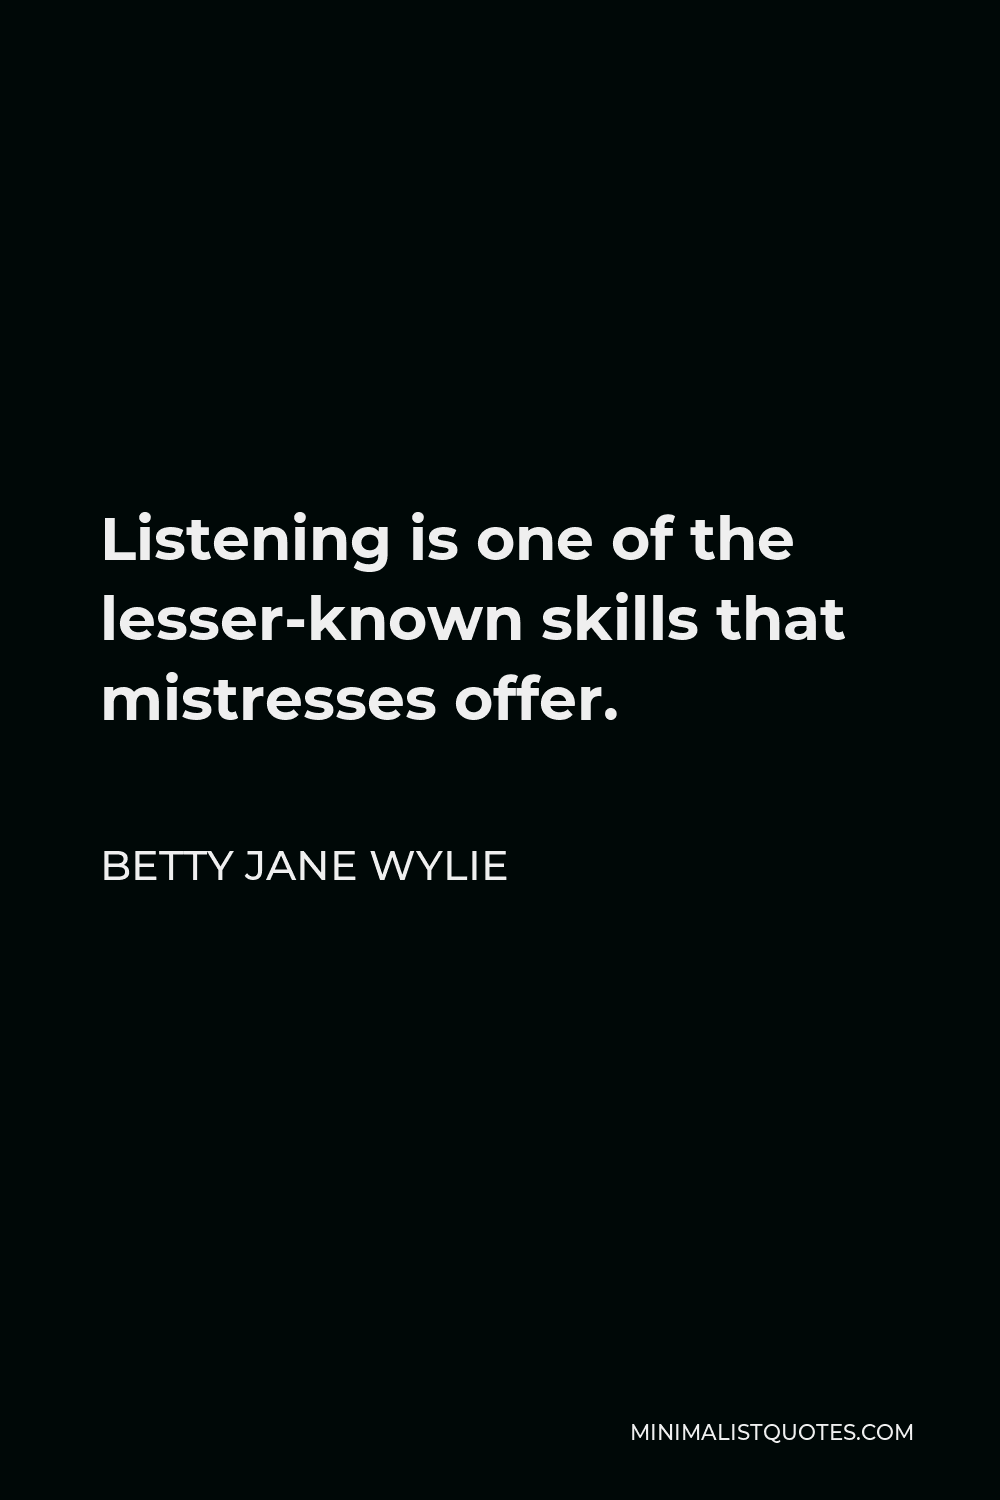 Betty Jane Wylie Quote - Listening is one of the lesser-known skills that mistresses offer.